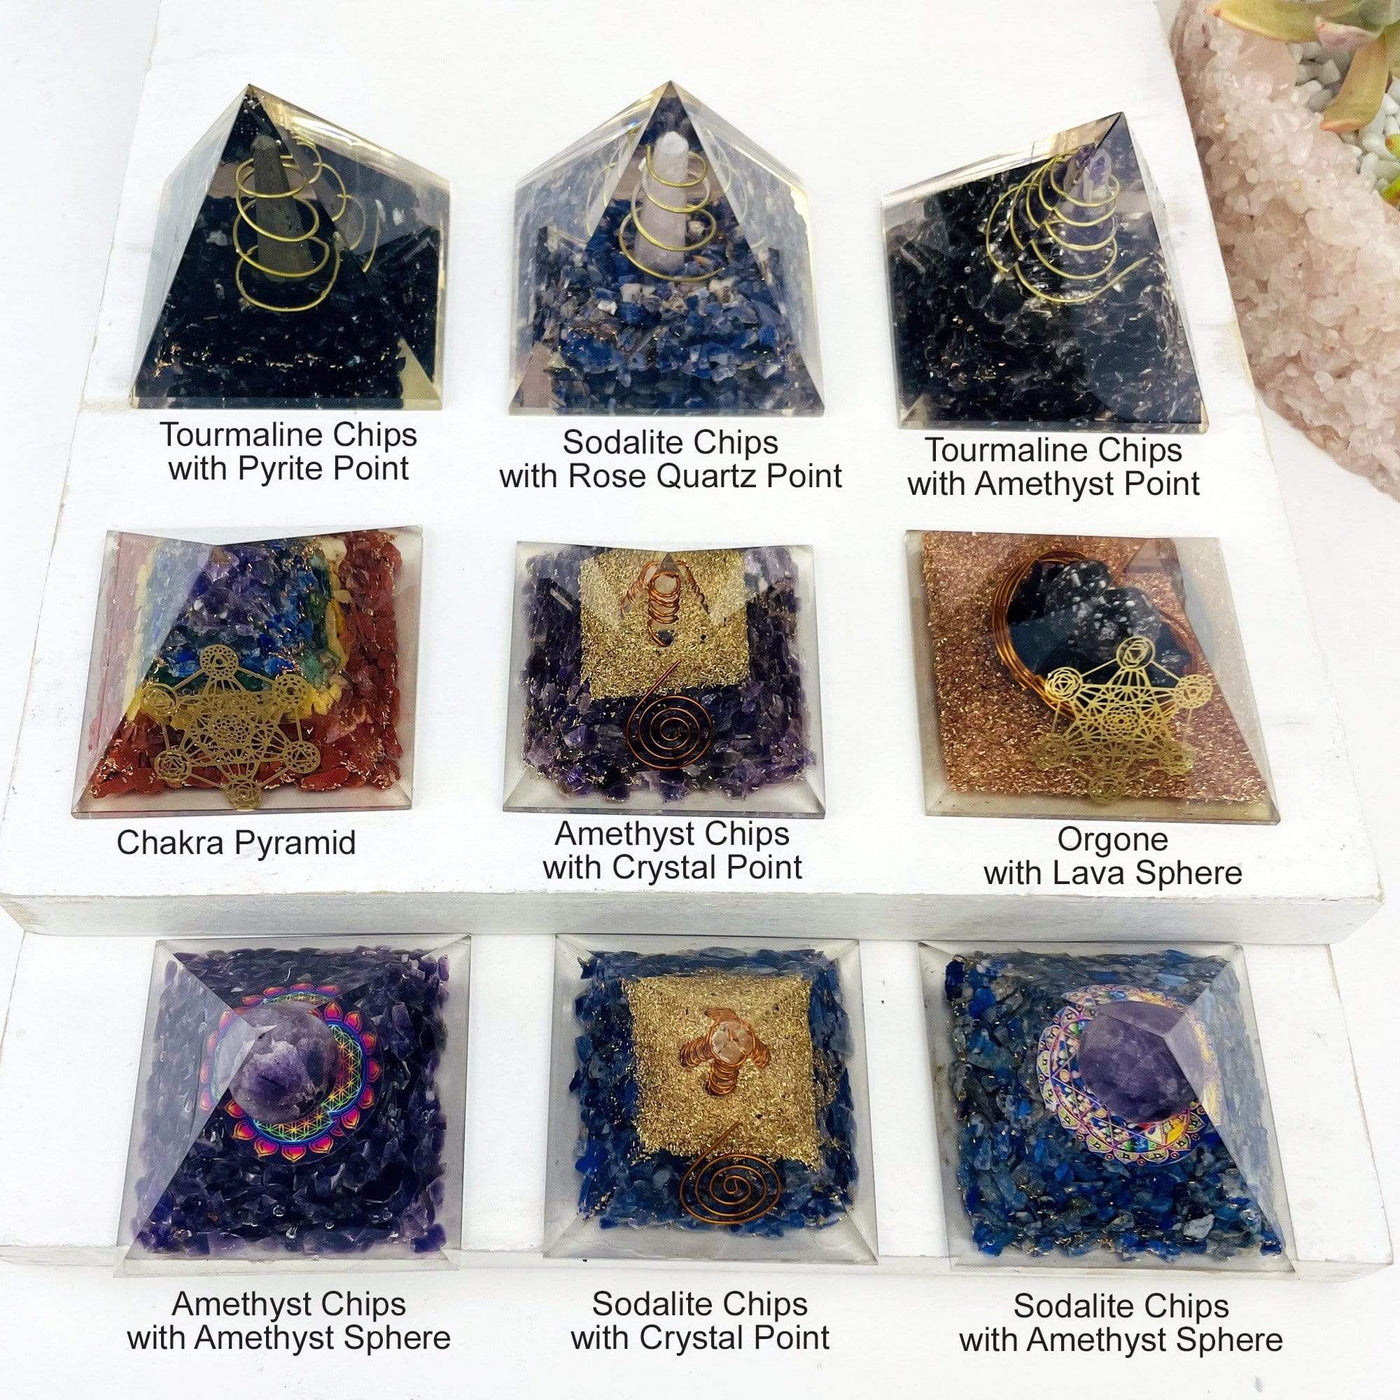 9 different Orgone Crystal Point Pyramids displayed, all containing different stones